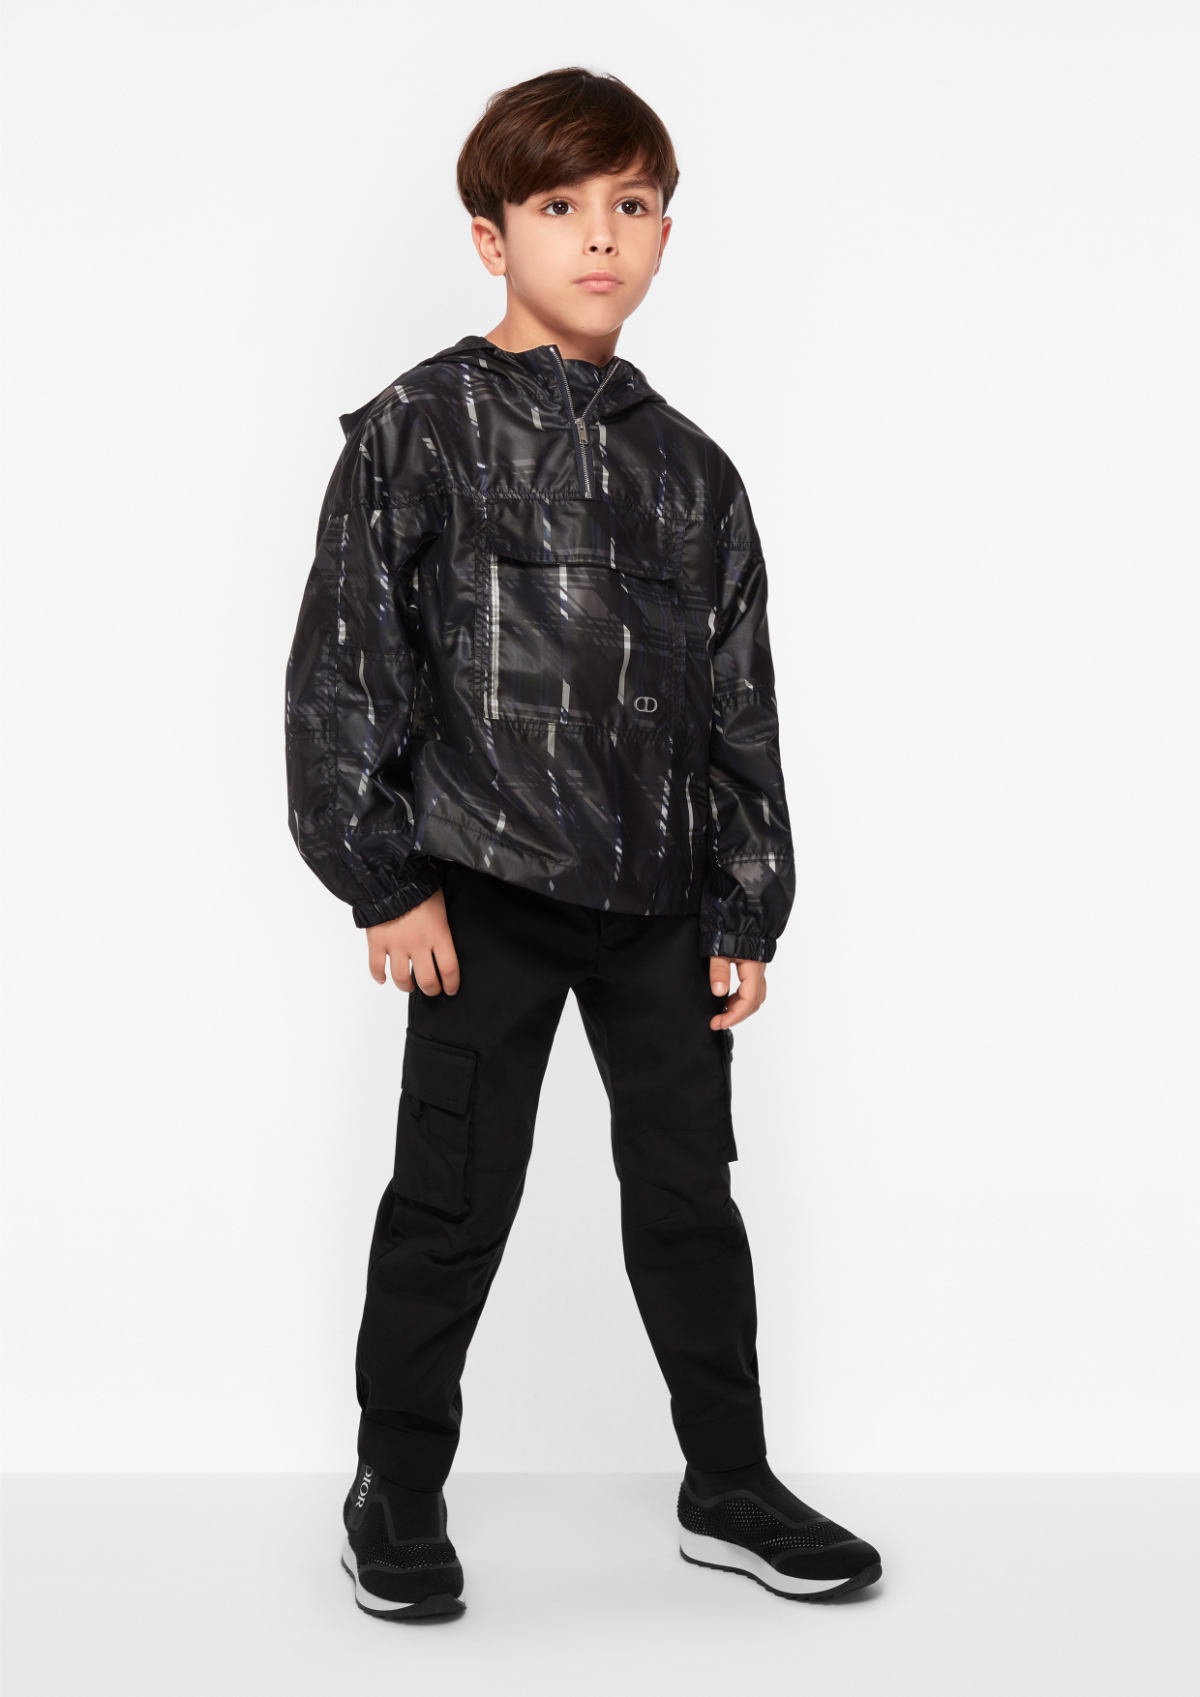 Dior Kids Ready-To-Wear: Boys Autumn-Winter 2020-21 Collection